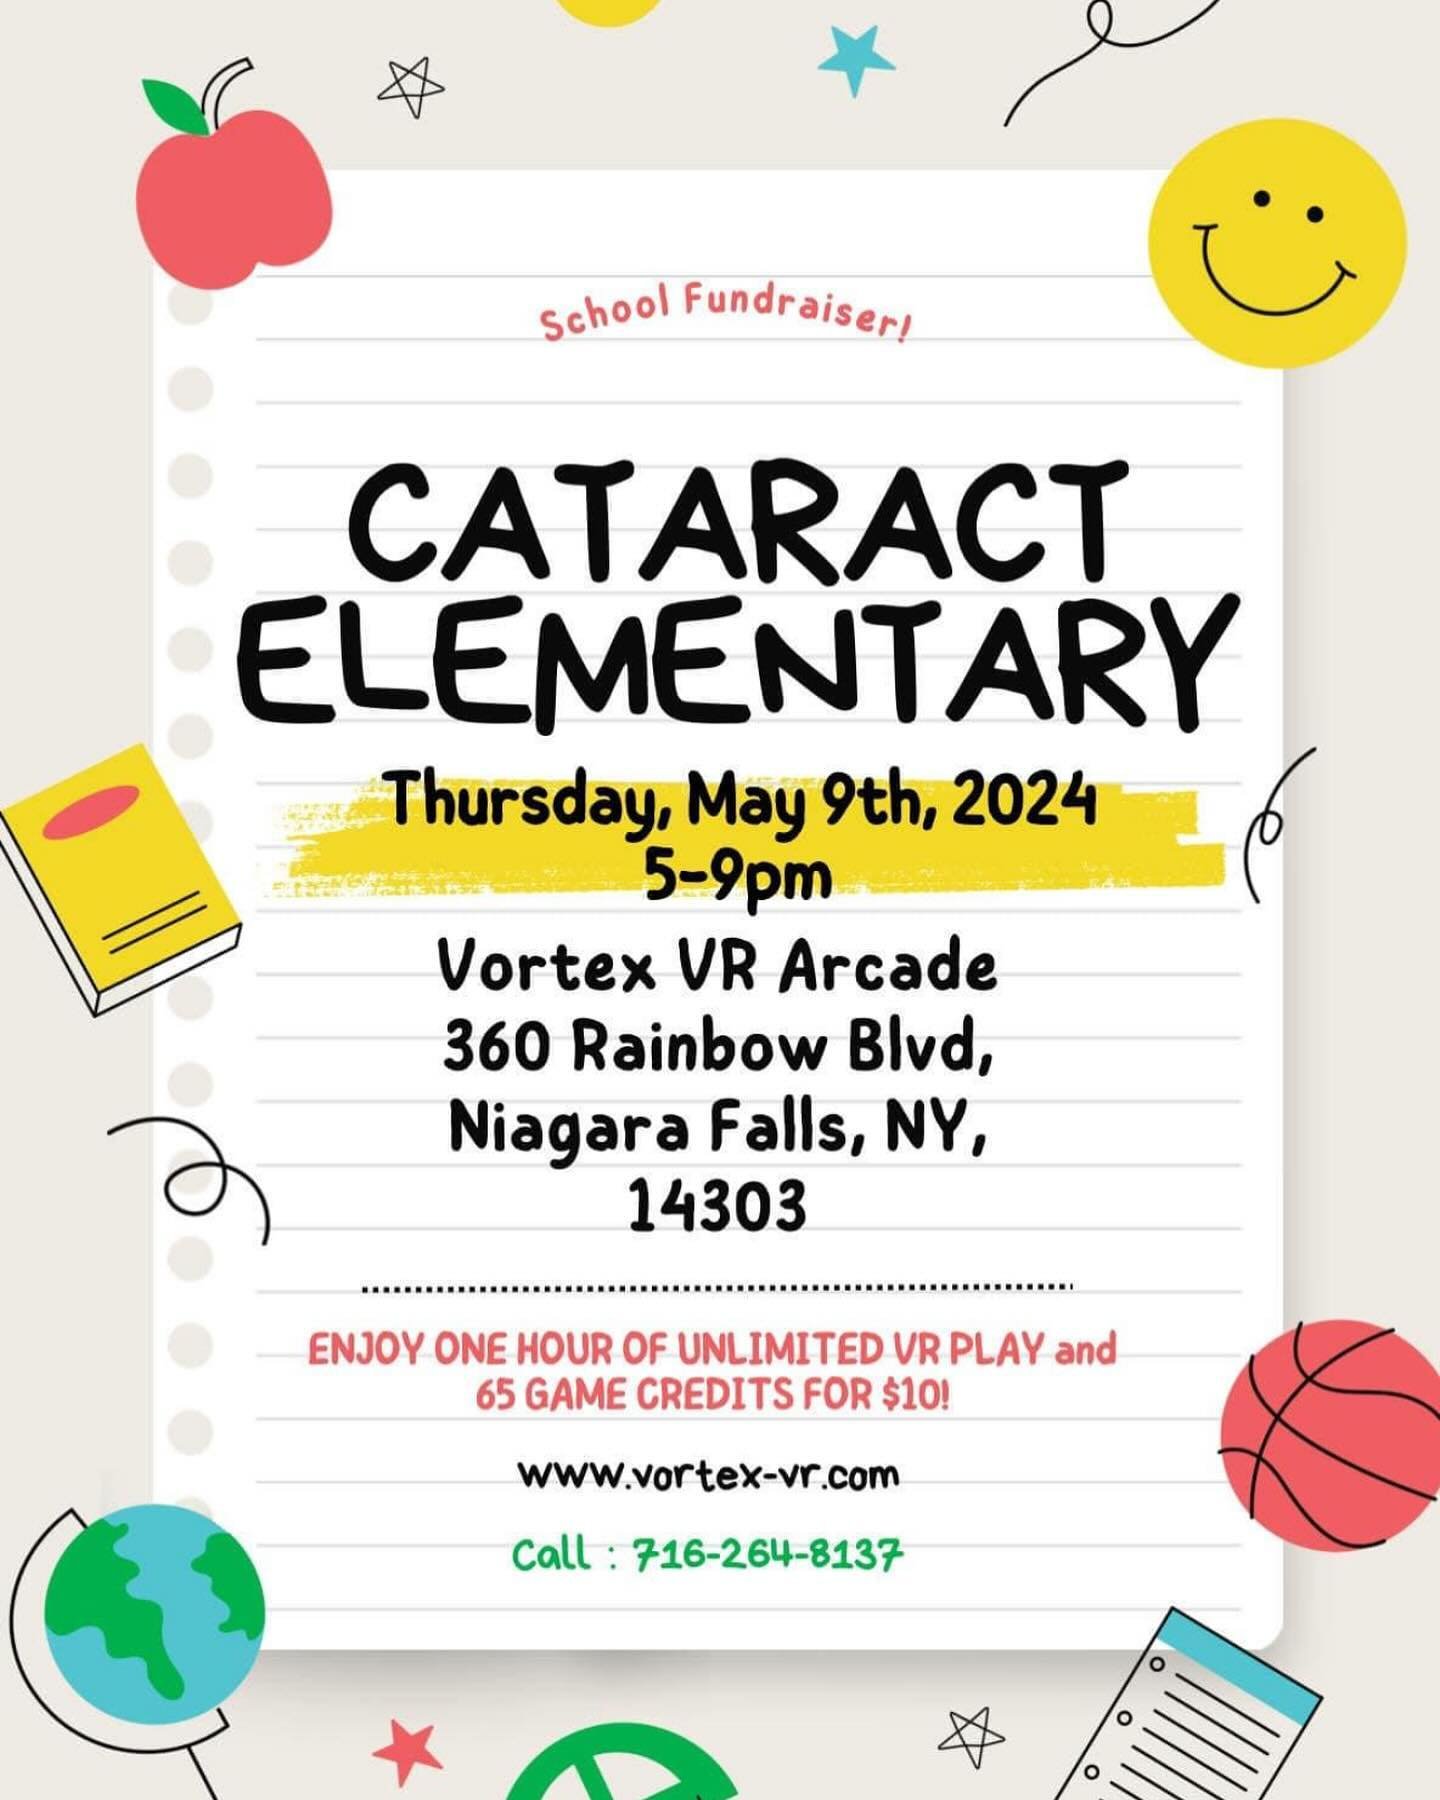 TOMORROW!! Stop by the vortex to support our friends at Cataract Elementary School from 5-9pm!👾
-
-
-

#arcade #arcadegames #videogames #retrogaming #retro #gaming #retrogames #nintendo #gamer #games #s #sega #ps #streetfighter #pinball #playstation